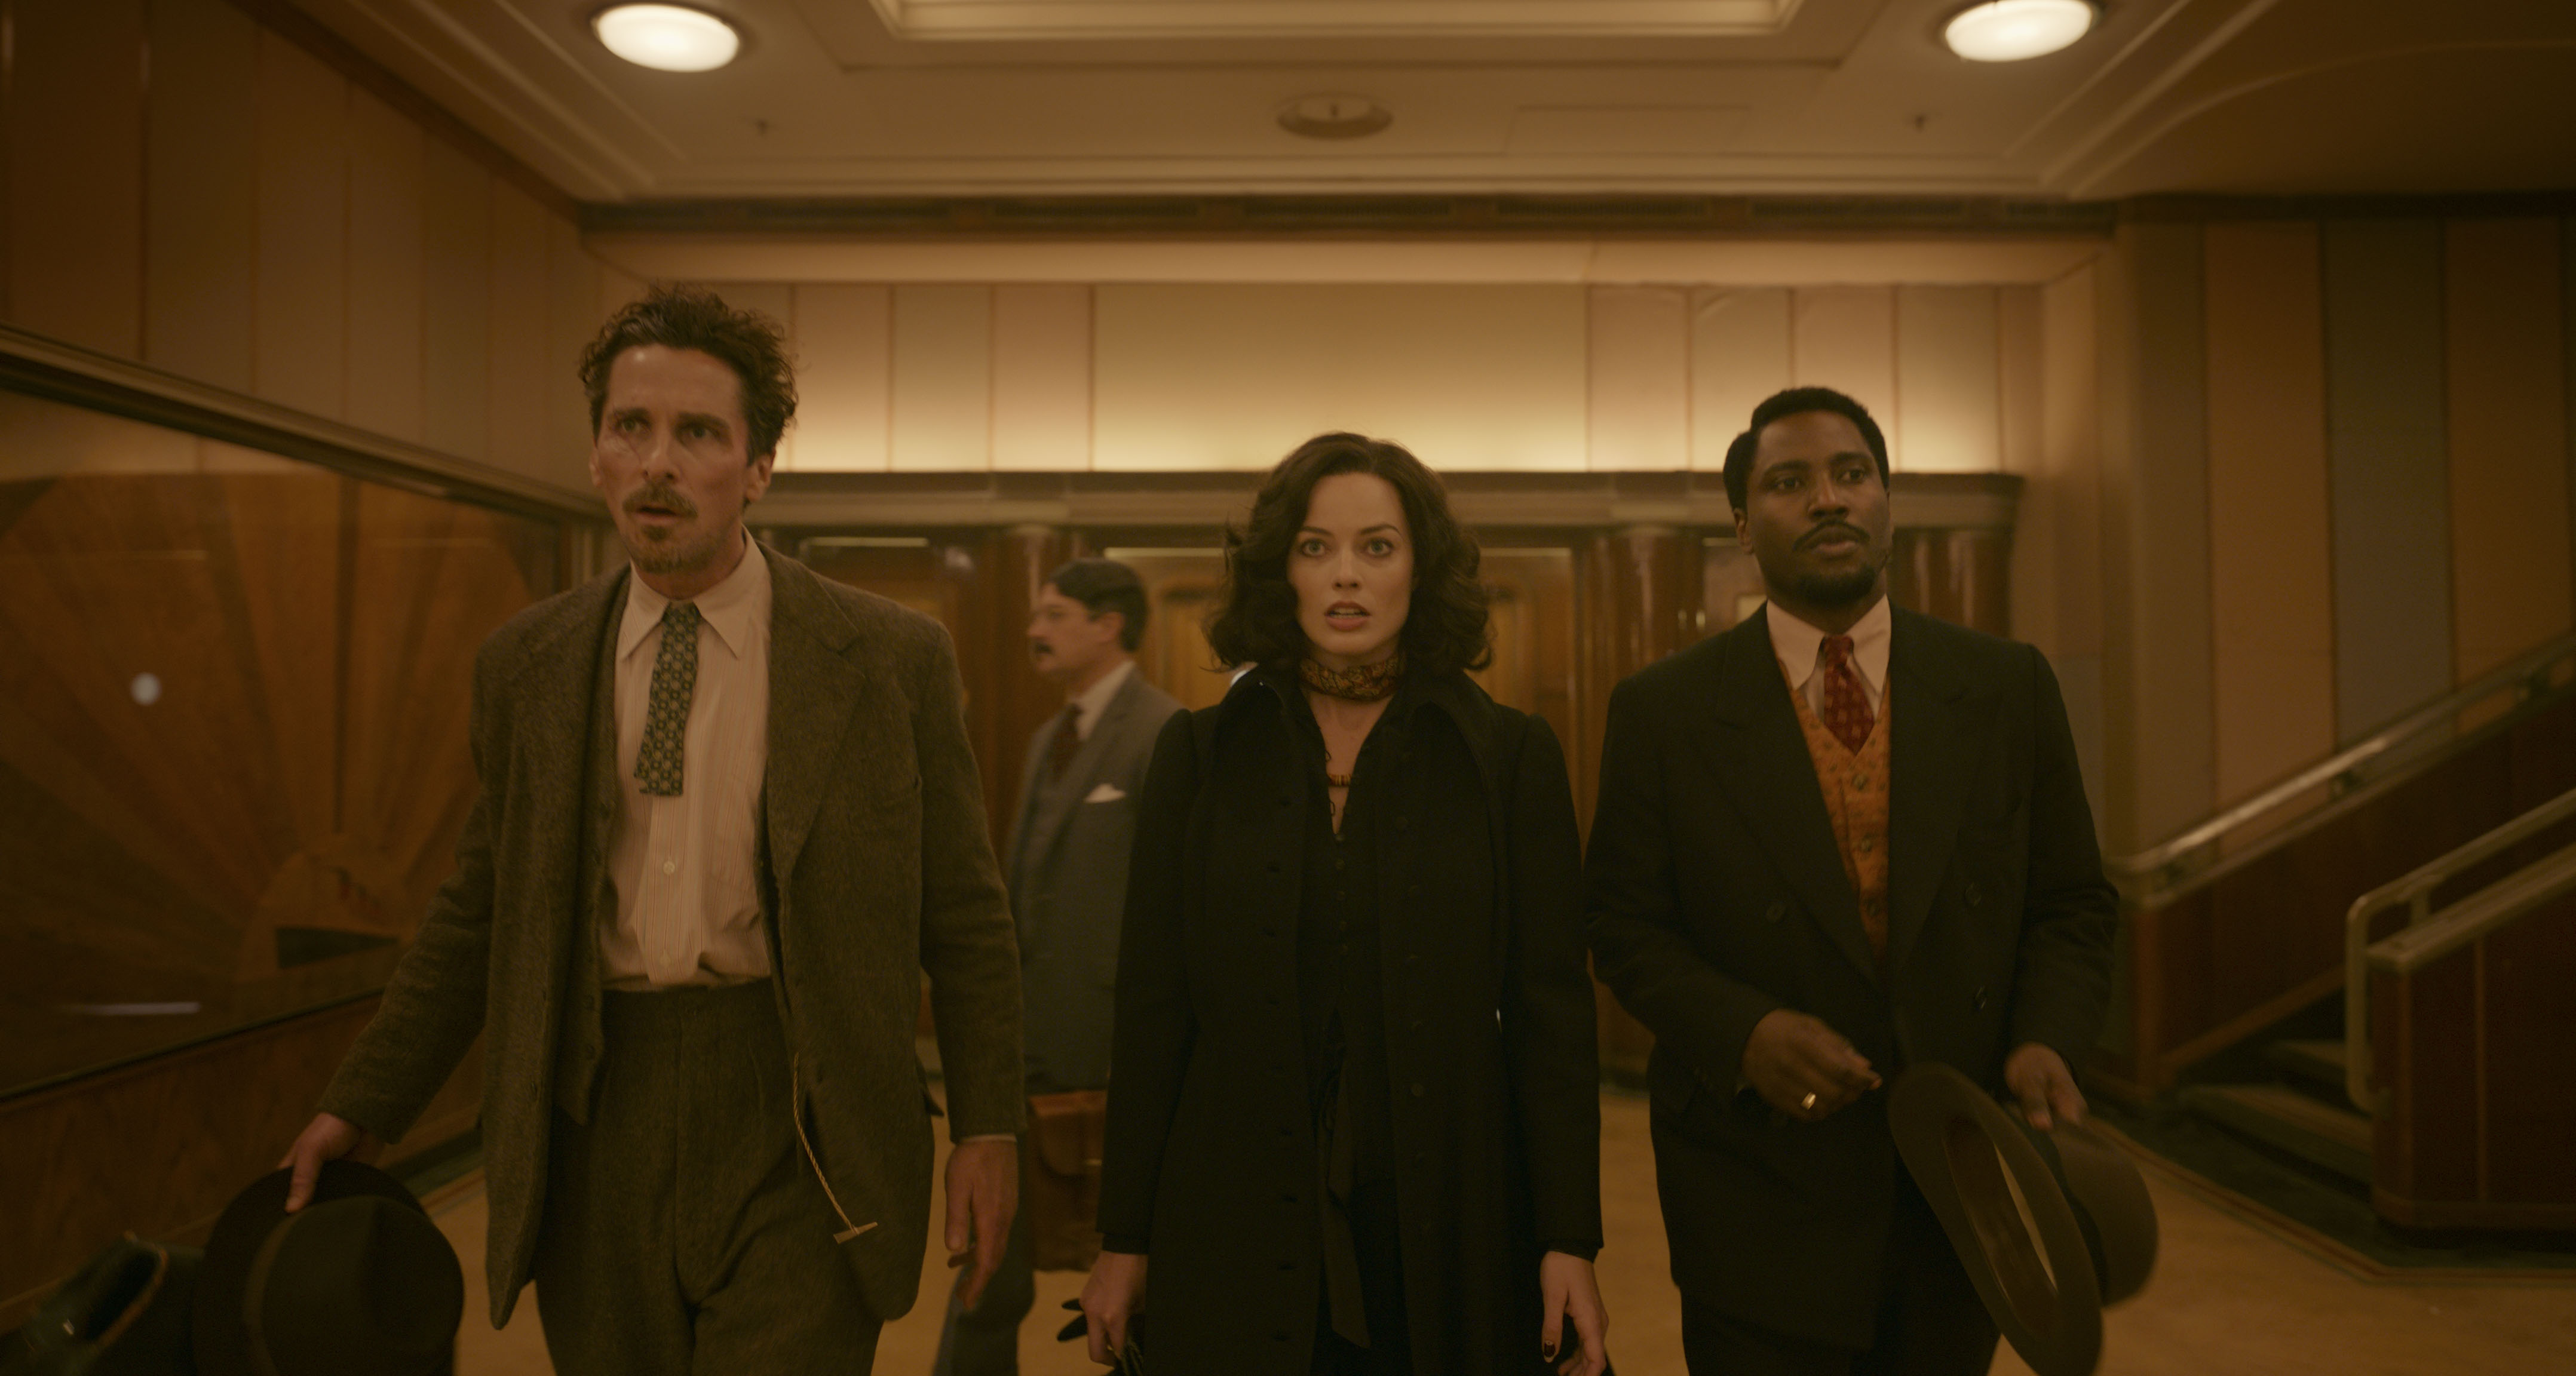 (L-R): Christian Bale, Margot Robbie, and John David Washington in 20th Century Studios' AMSTERDAM. Photo courtesy of 20th Century Studios. All Rights Reserved.